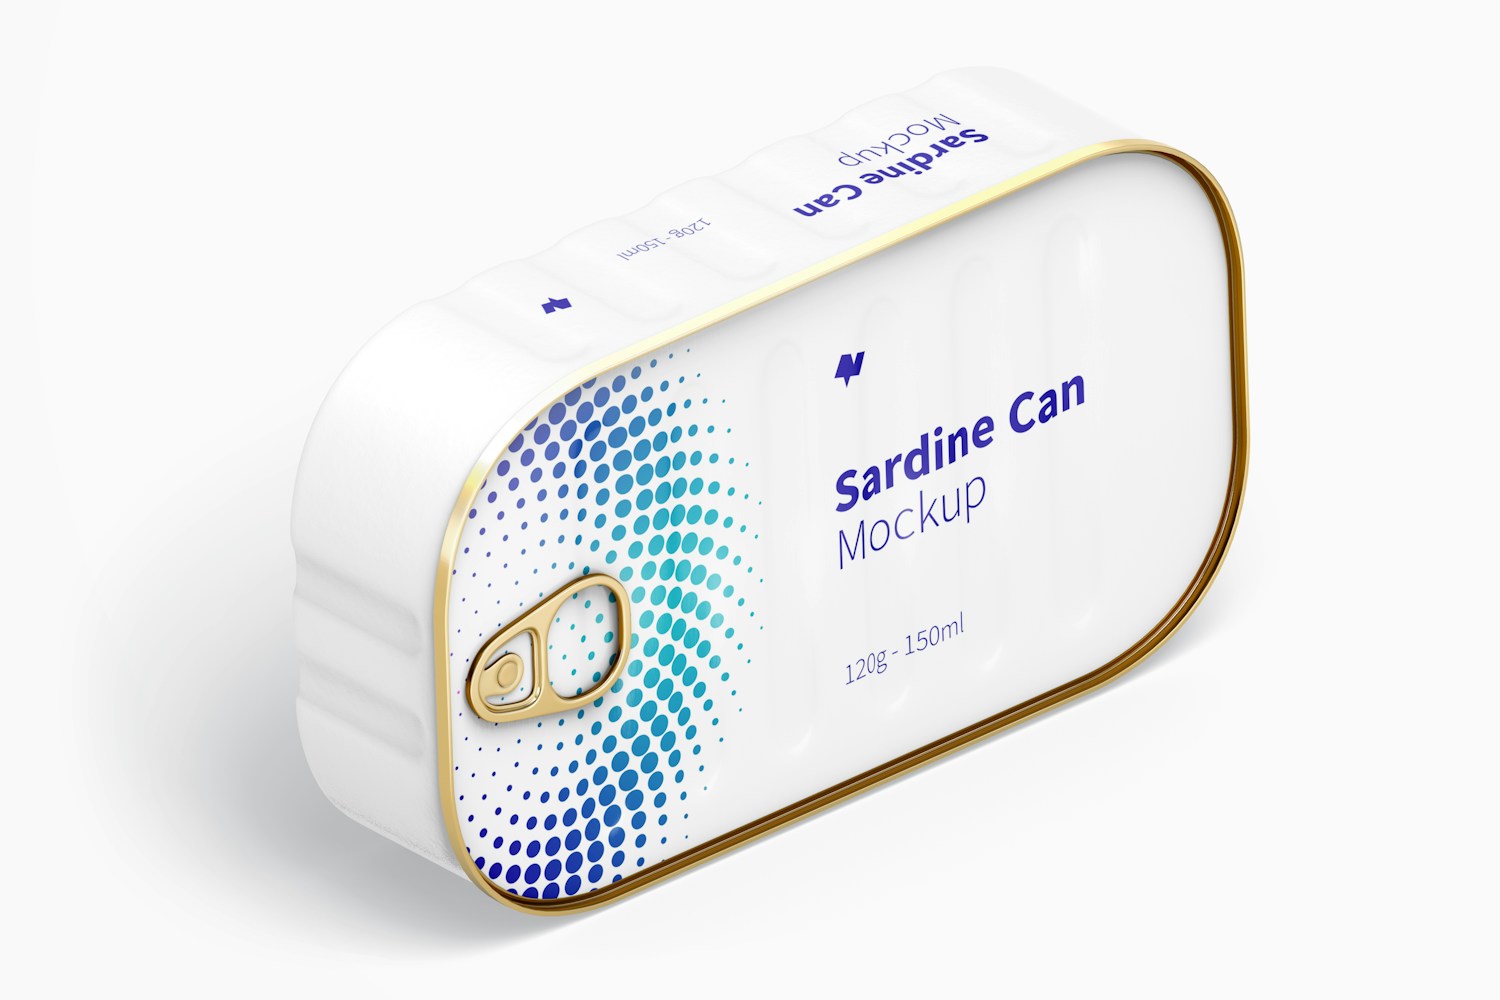 120g Sardine Can Mockup, Isometric Right Side View